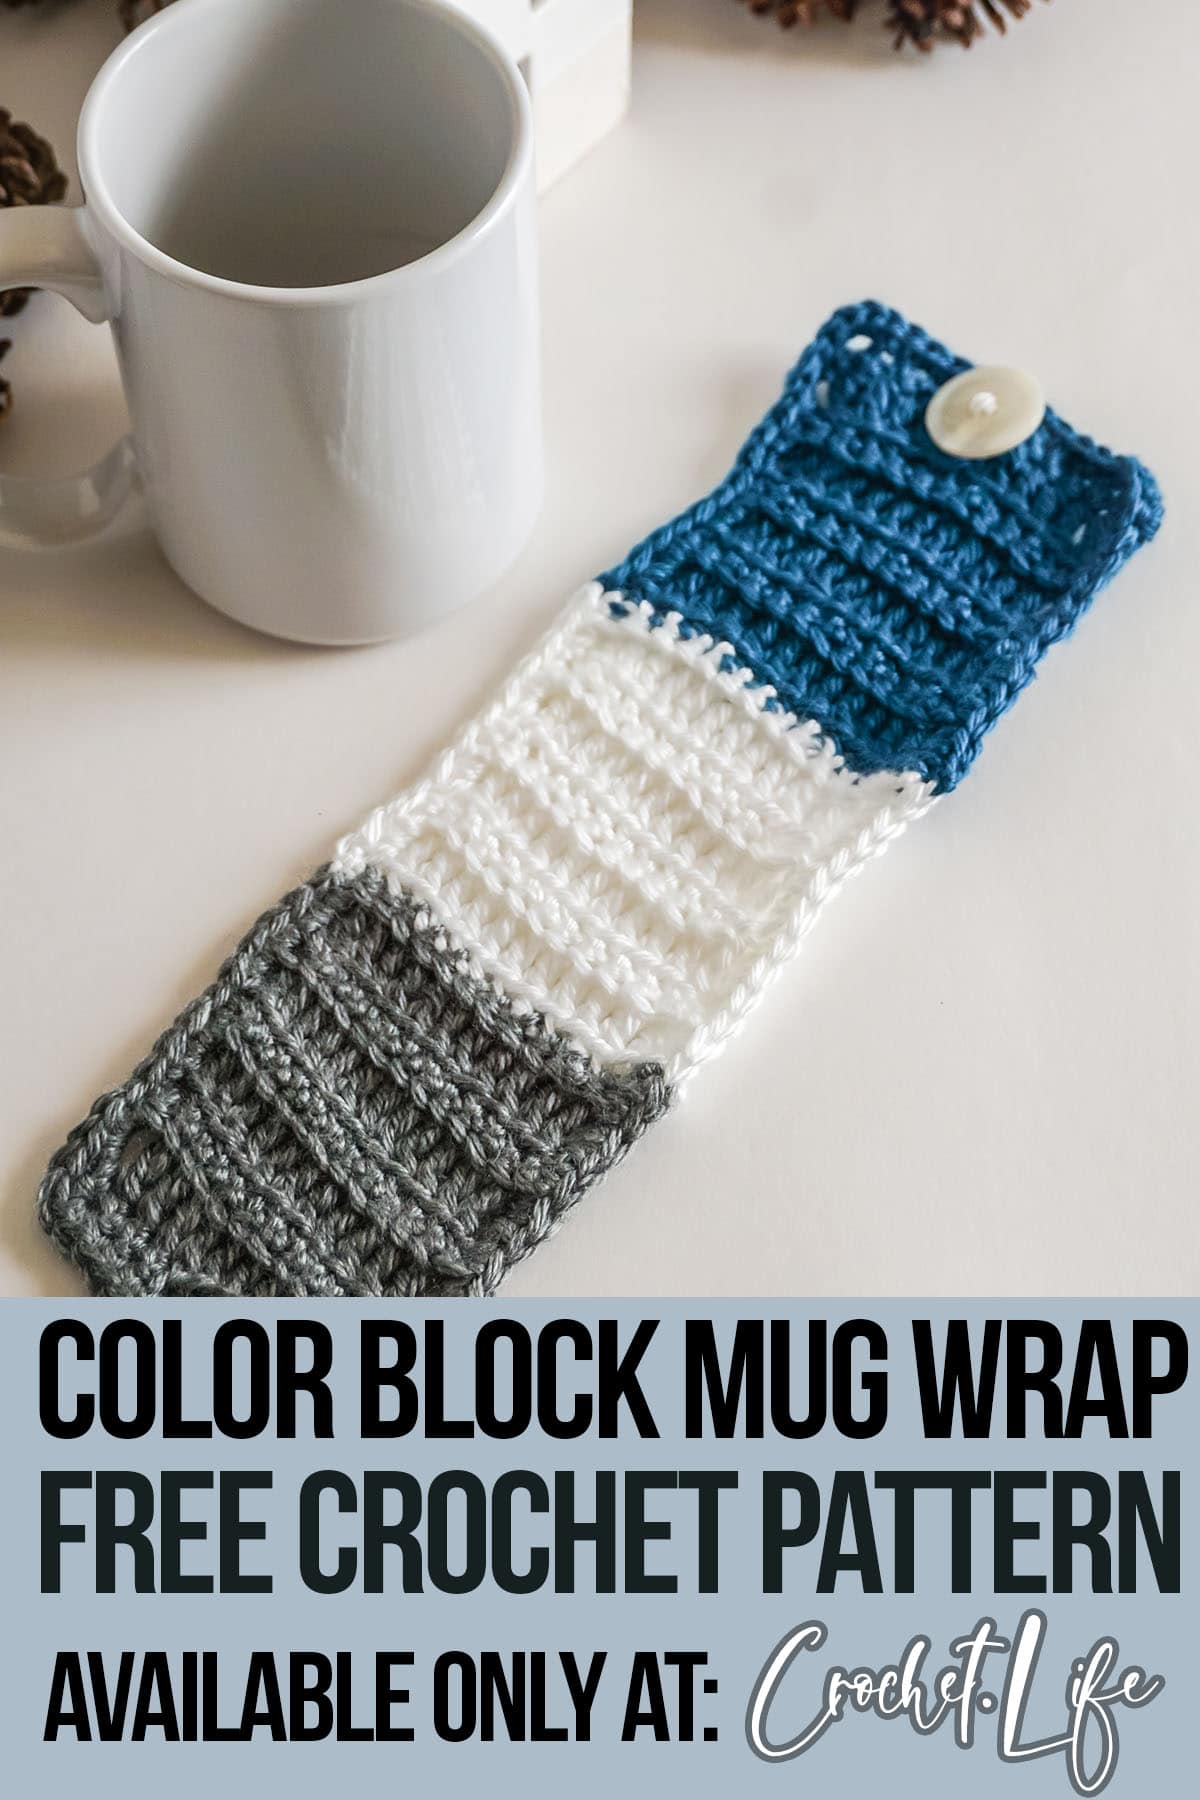 crochet pattern for a mug cozy with text which reads color block mug wrap free crochet pattern available only at crochet.life